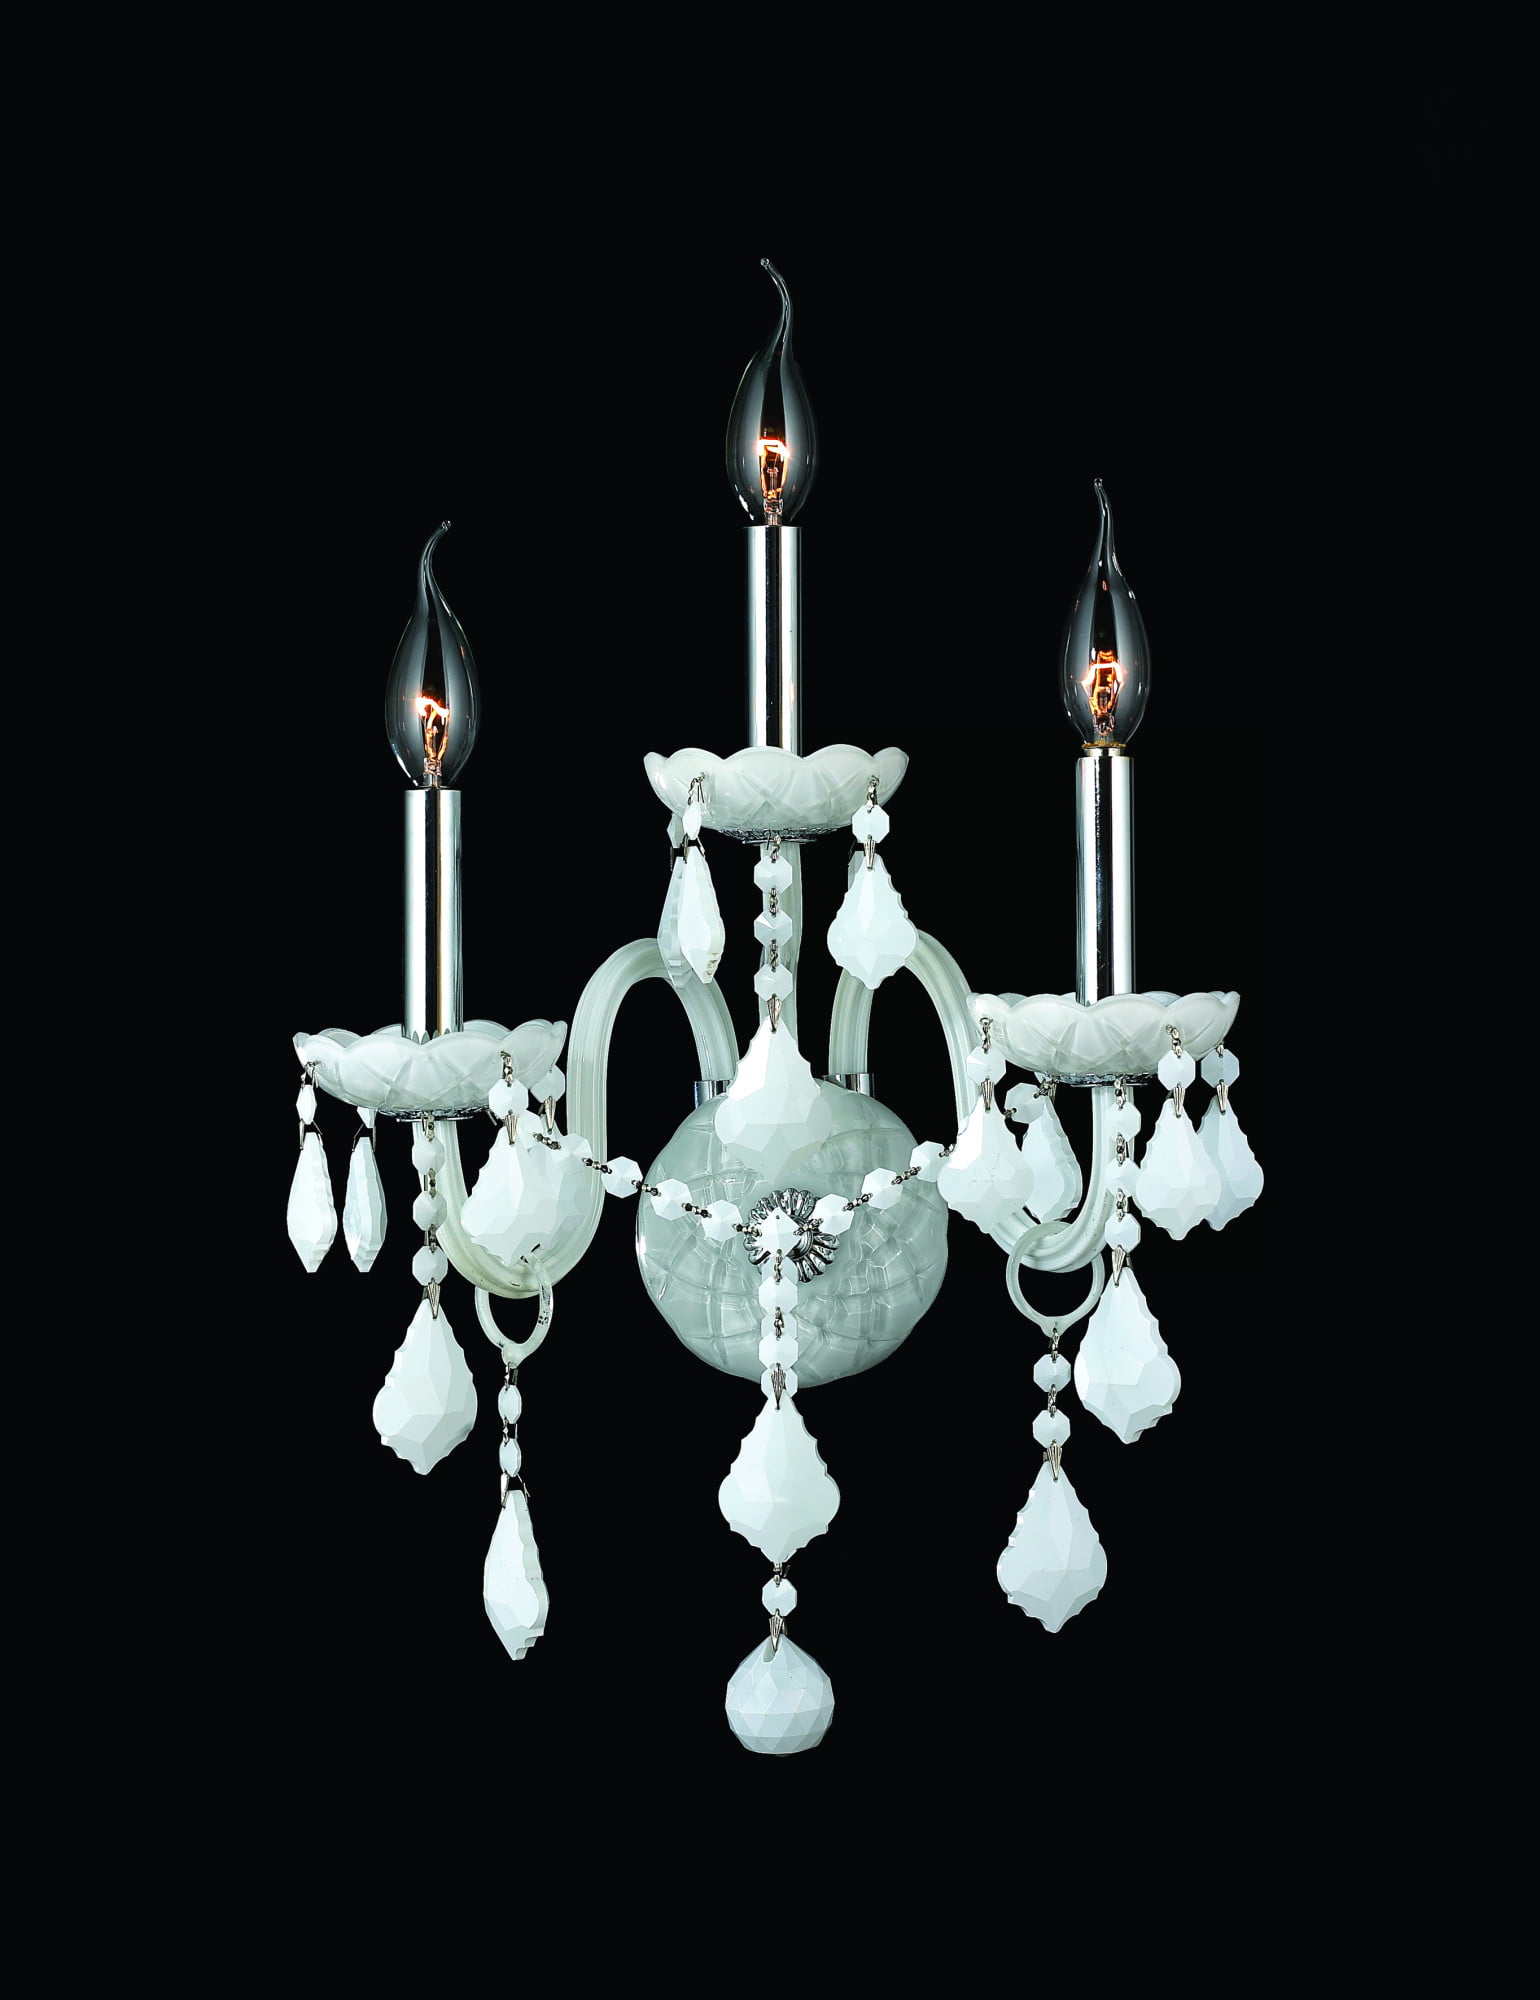 Provence Collection 3 Light Chrome Finish and White Crystal Candle Wall Sconce 13" W x 18" H Medium Two 2 Tier